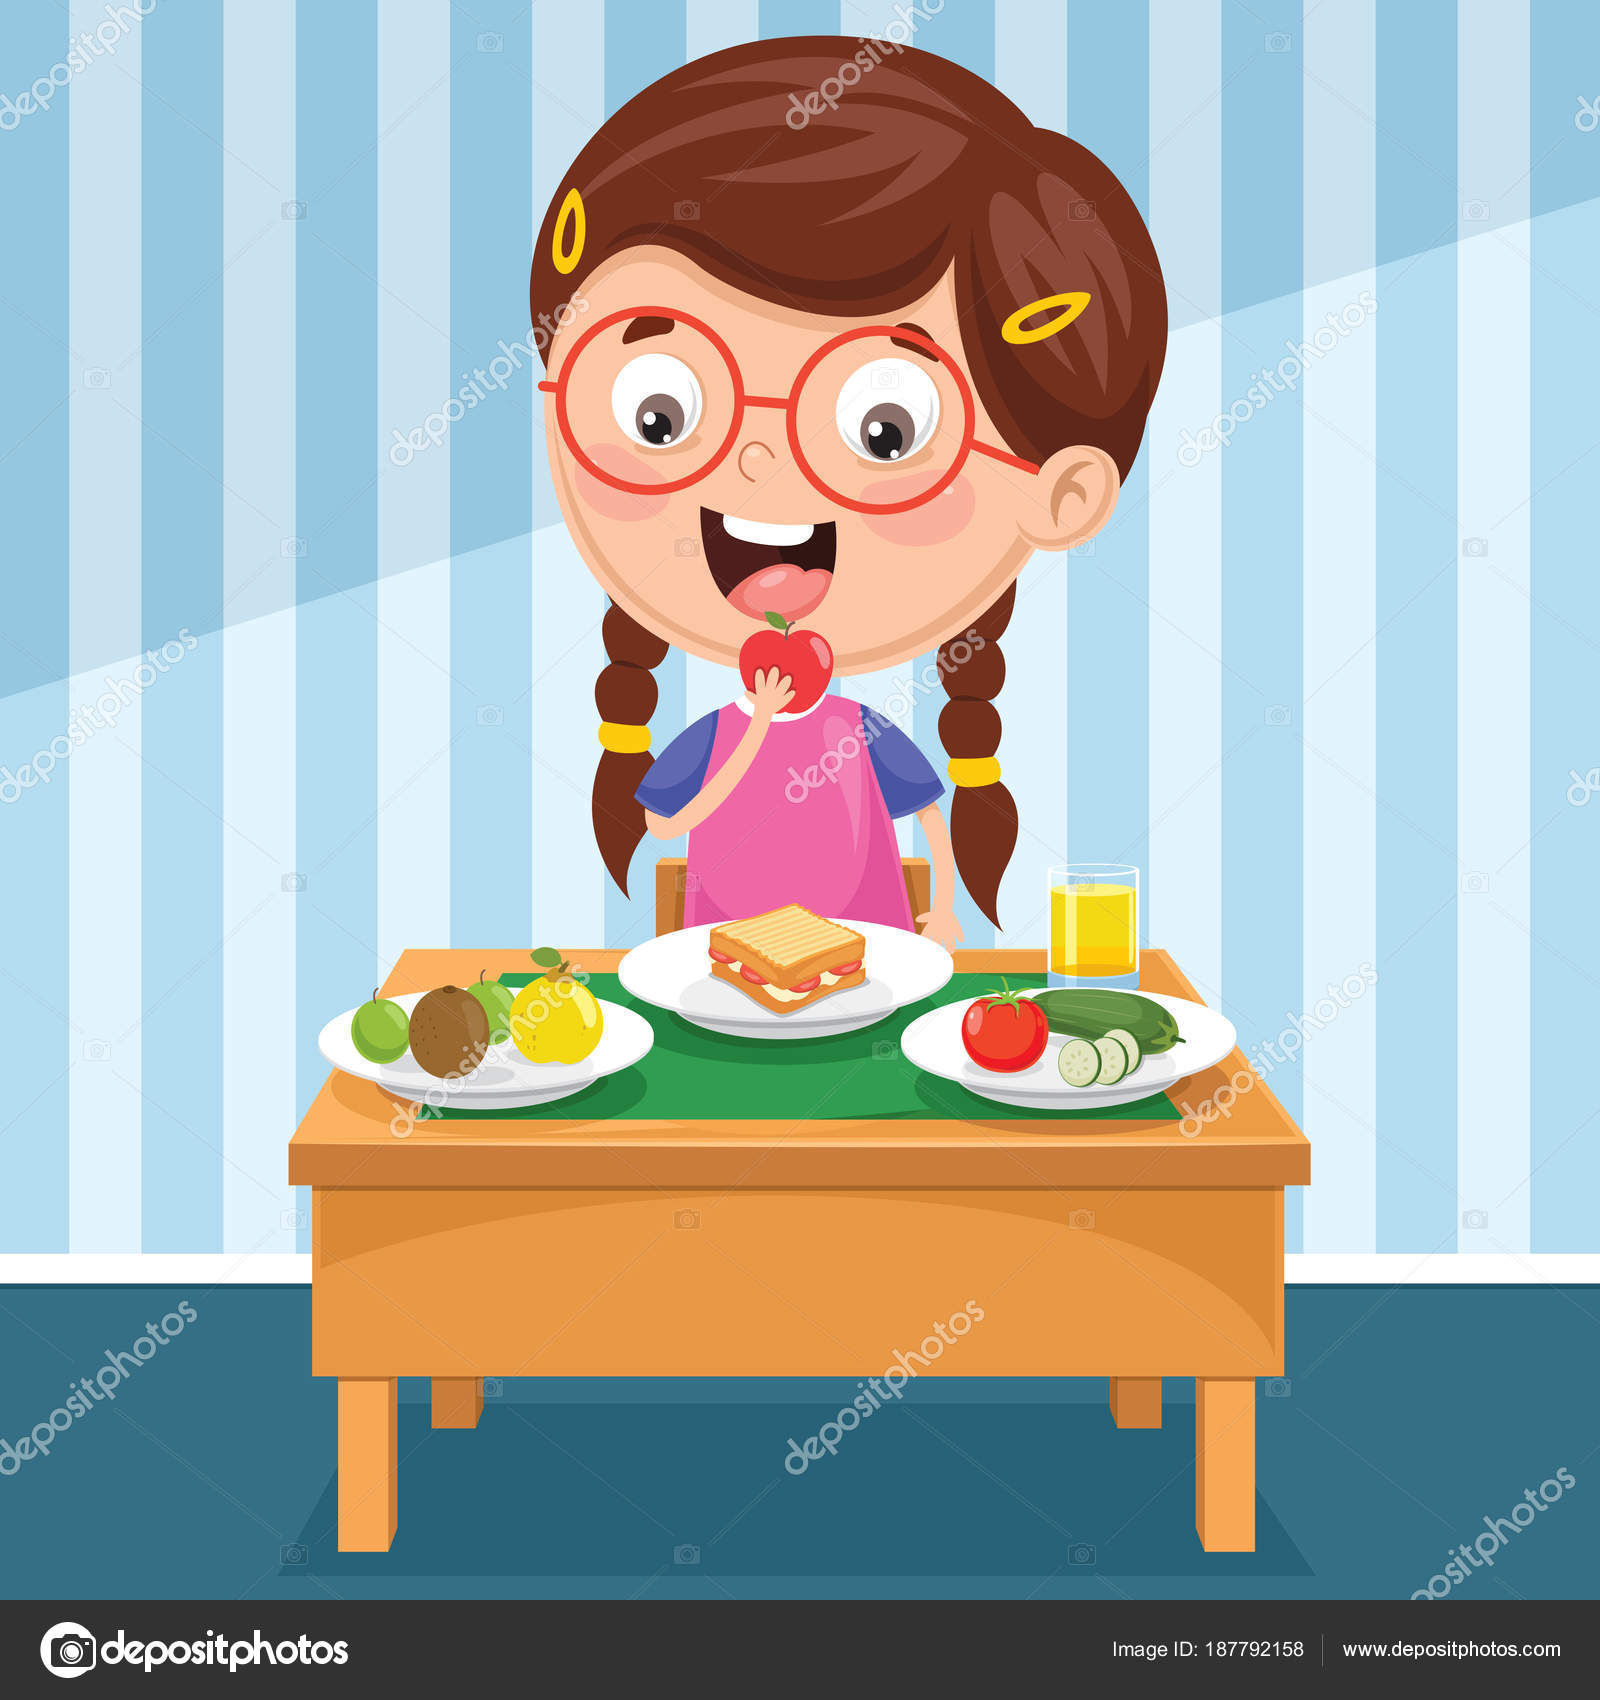 Kids eating lunch Vector Art Stock Images | Depositphotos